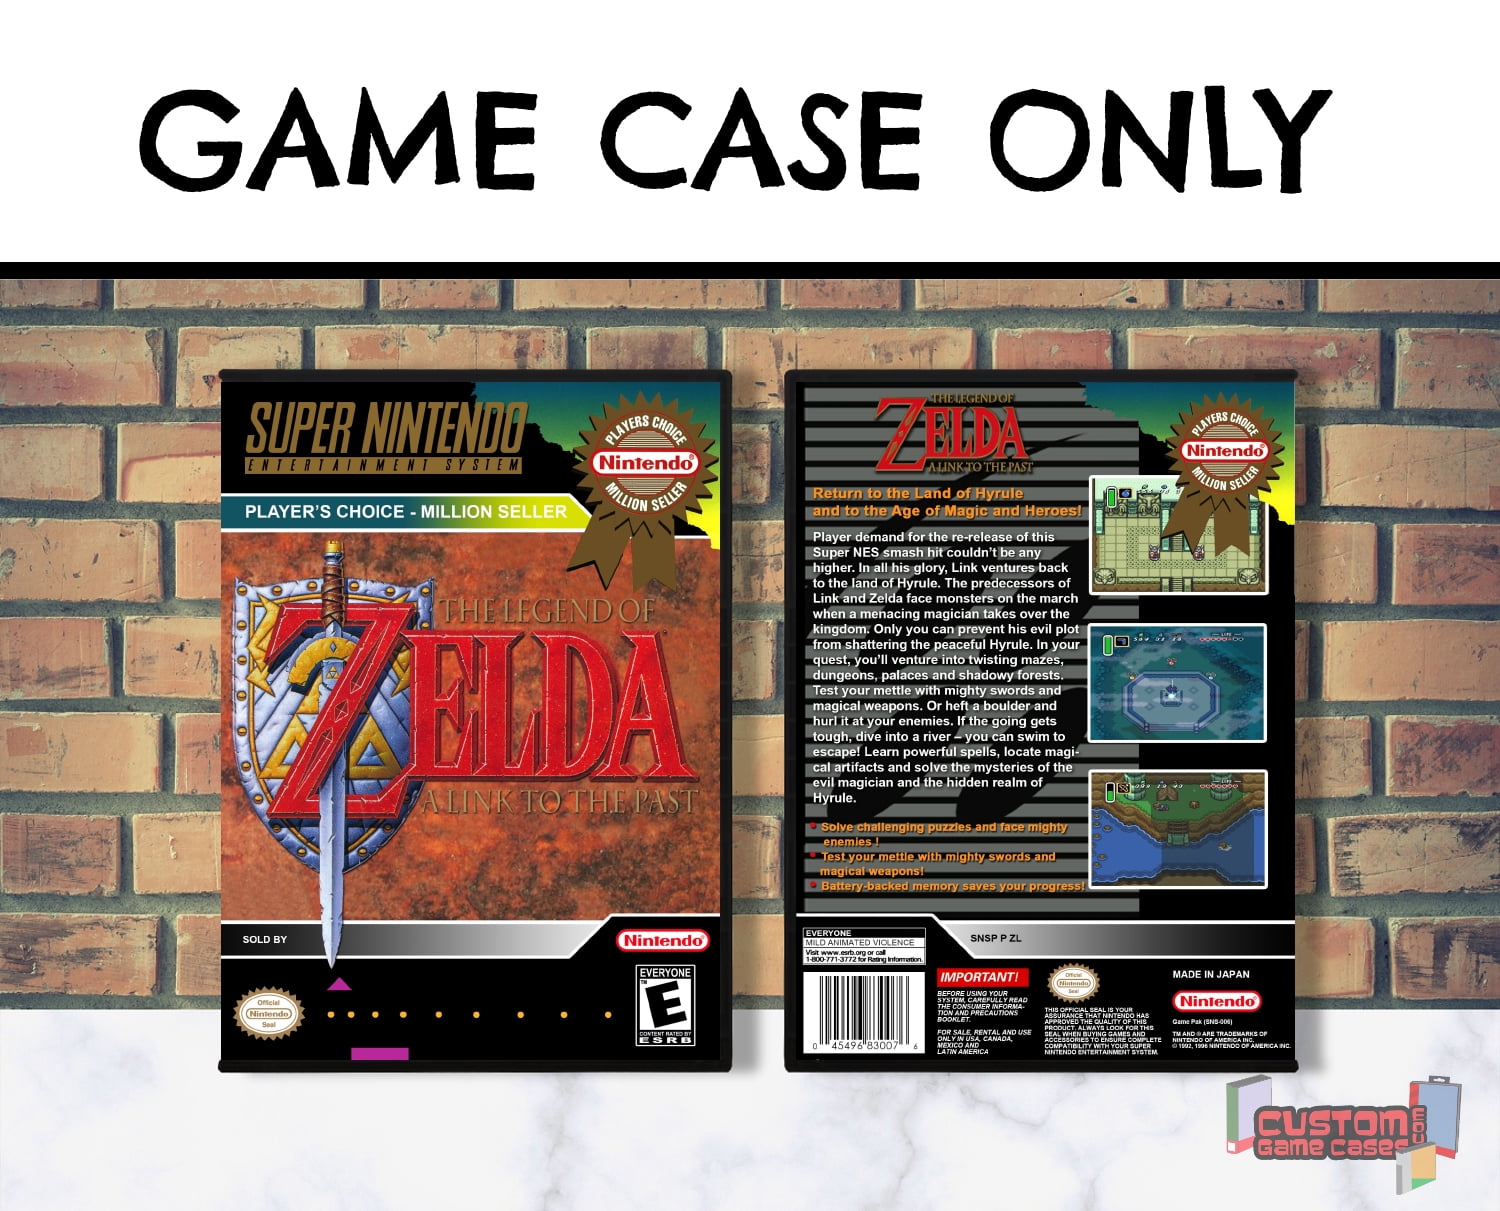 Legend of Zelda, The - A Link to the Past DX Game Media (SNES) (Hack) -  Super Nintendo Entertainment System - LaunchBox Community Forums